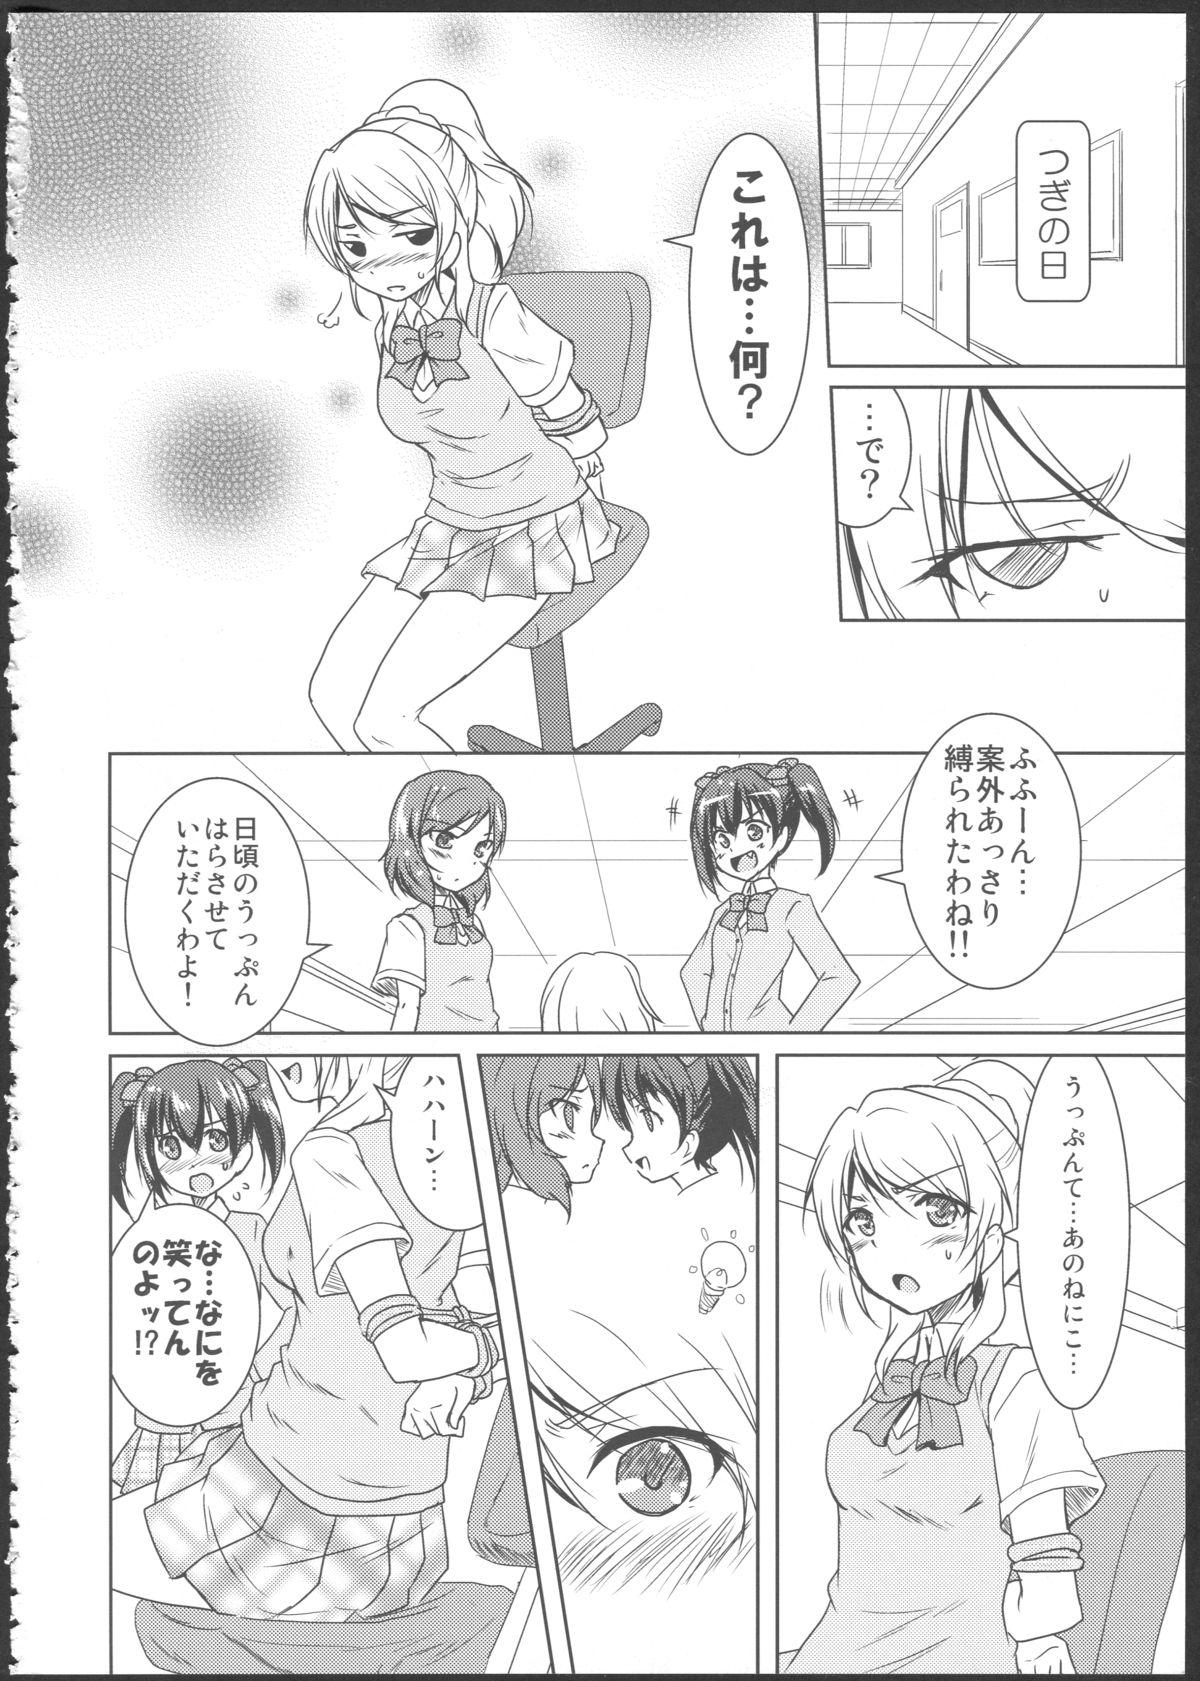 Friends Princess and Panther! - Love live Famosa - Page 5